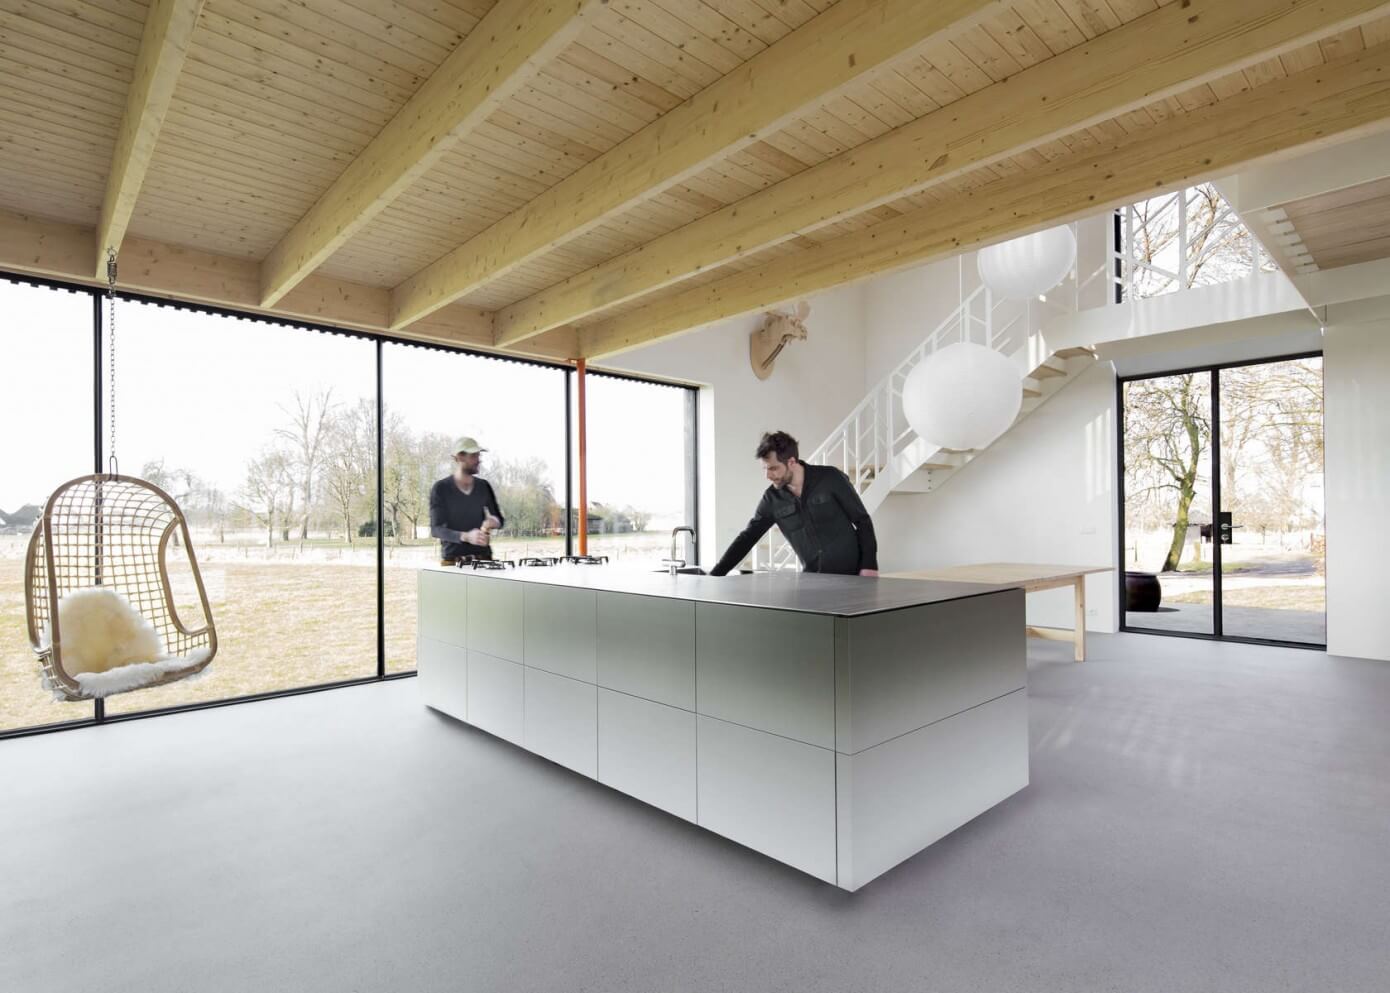 Huize Looveld by Studio Puisto